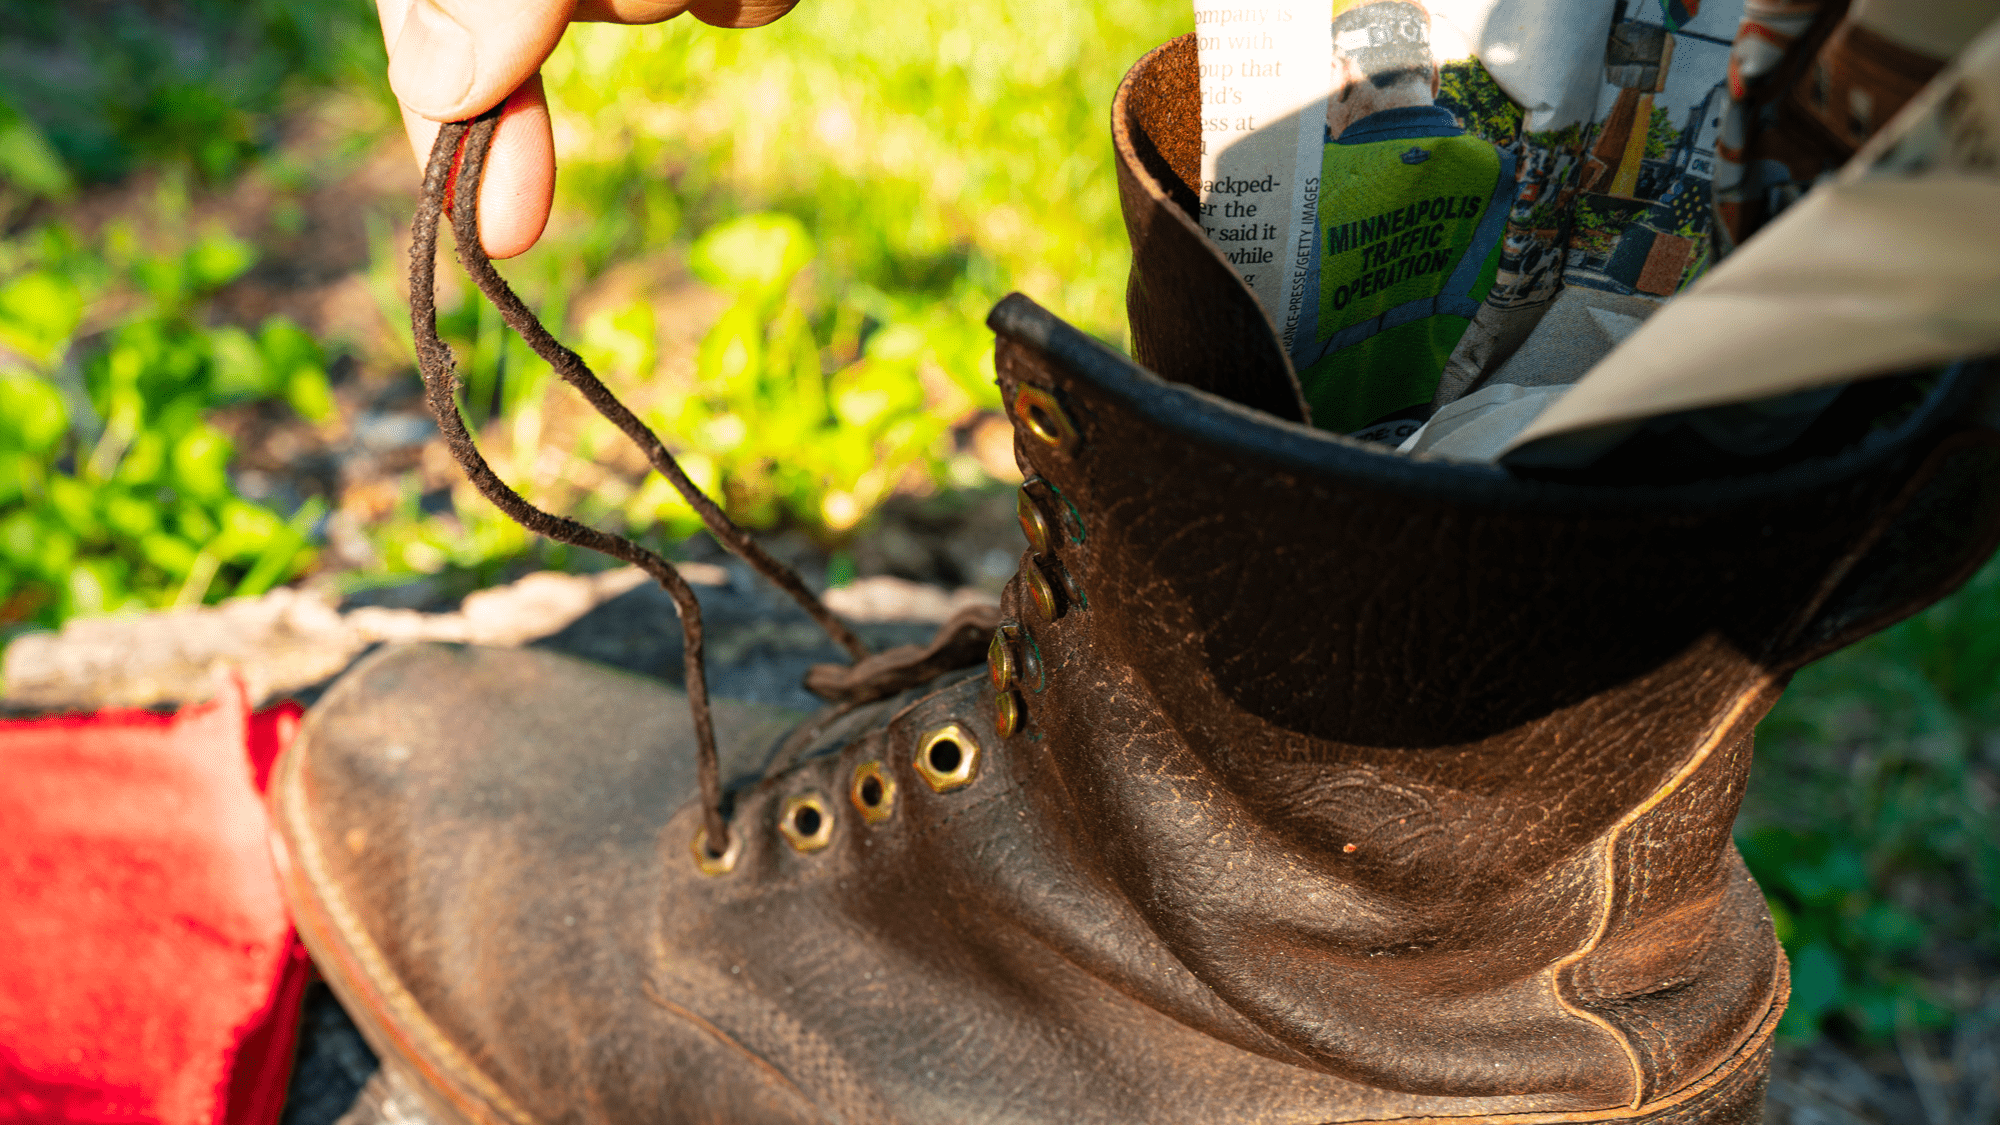 Removing laces from boot